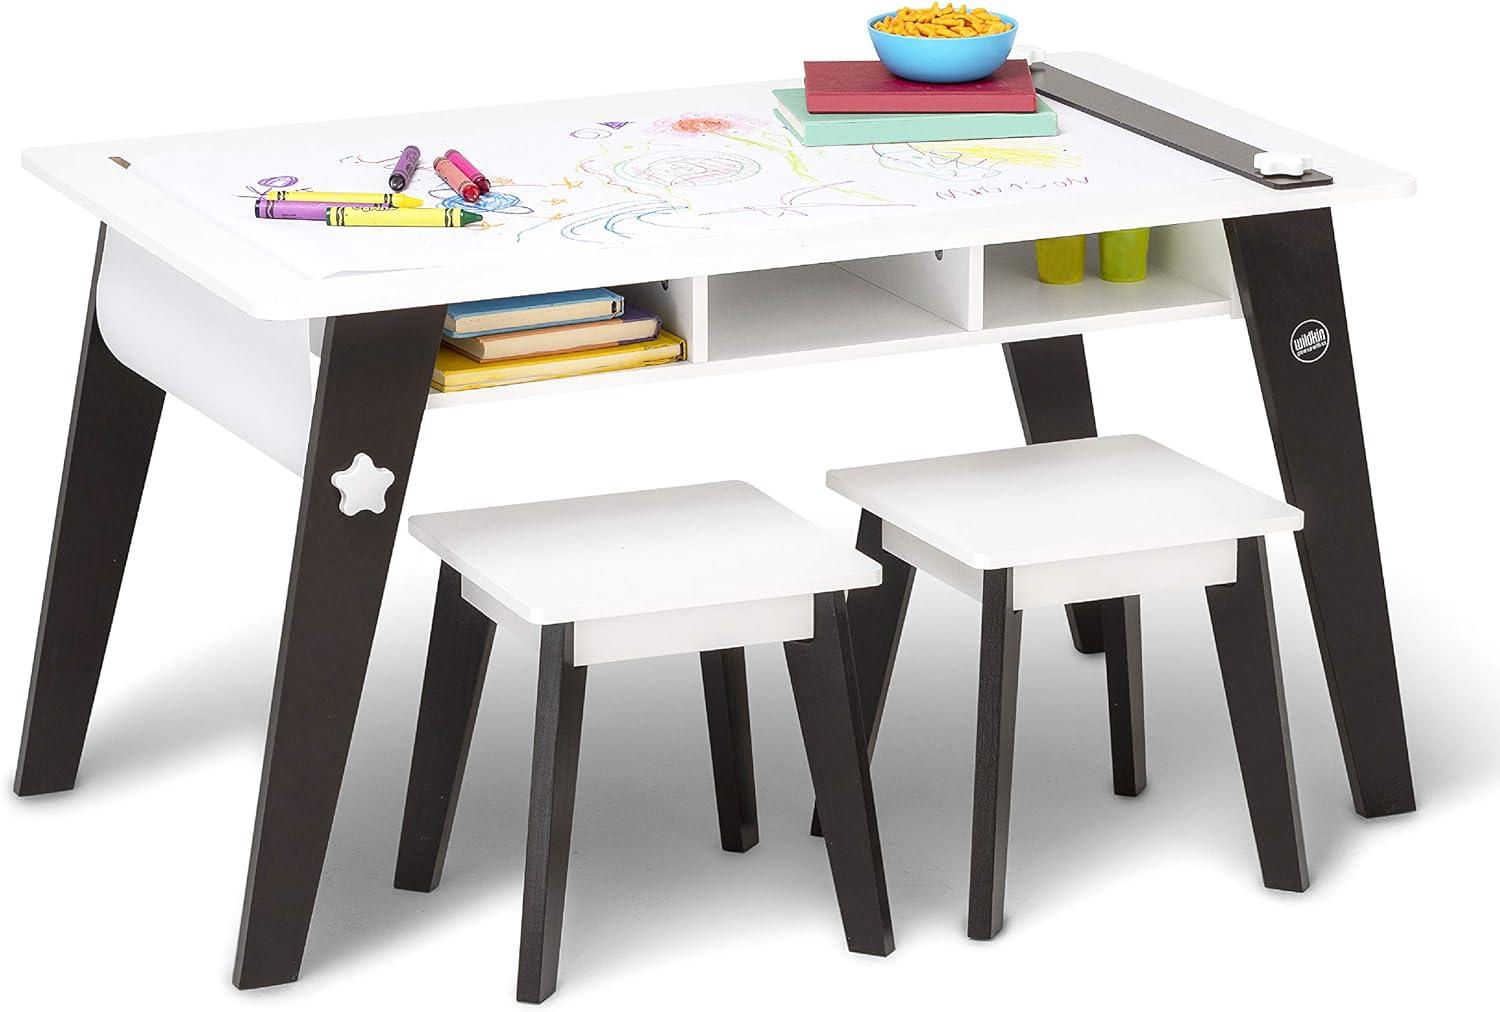 Espresso Mid-Century Modern Kids Arts and Crafts Table Set with Stools